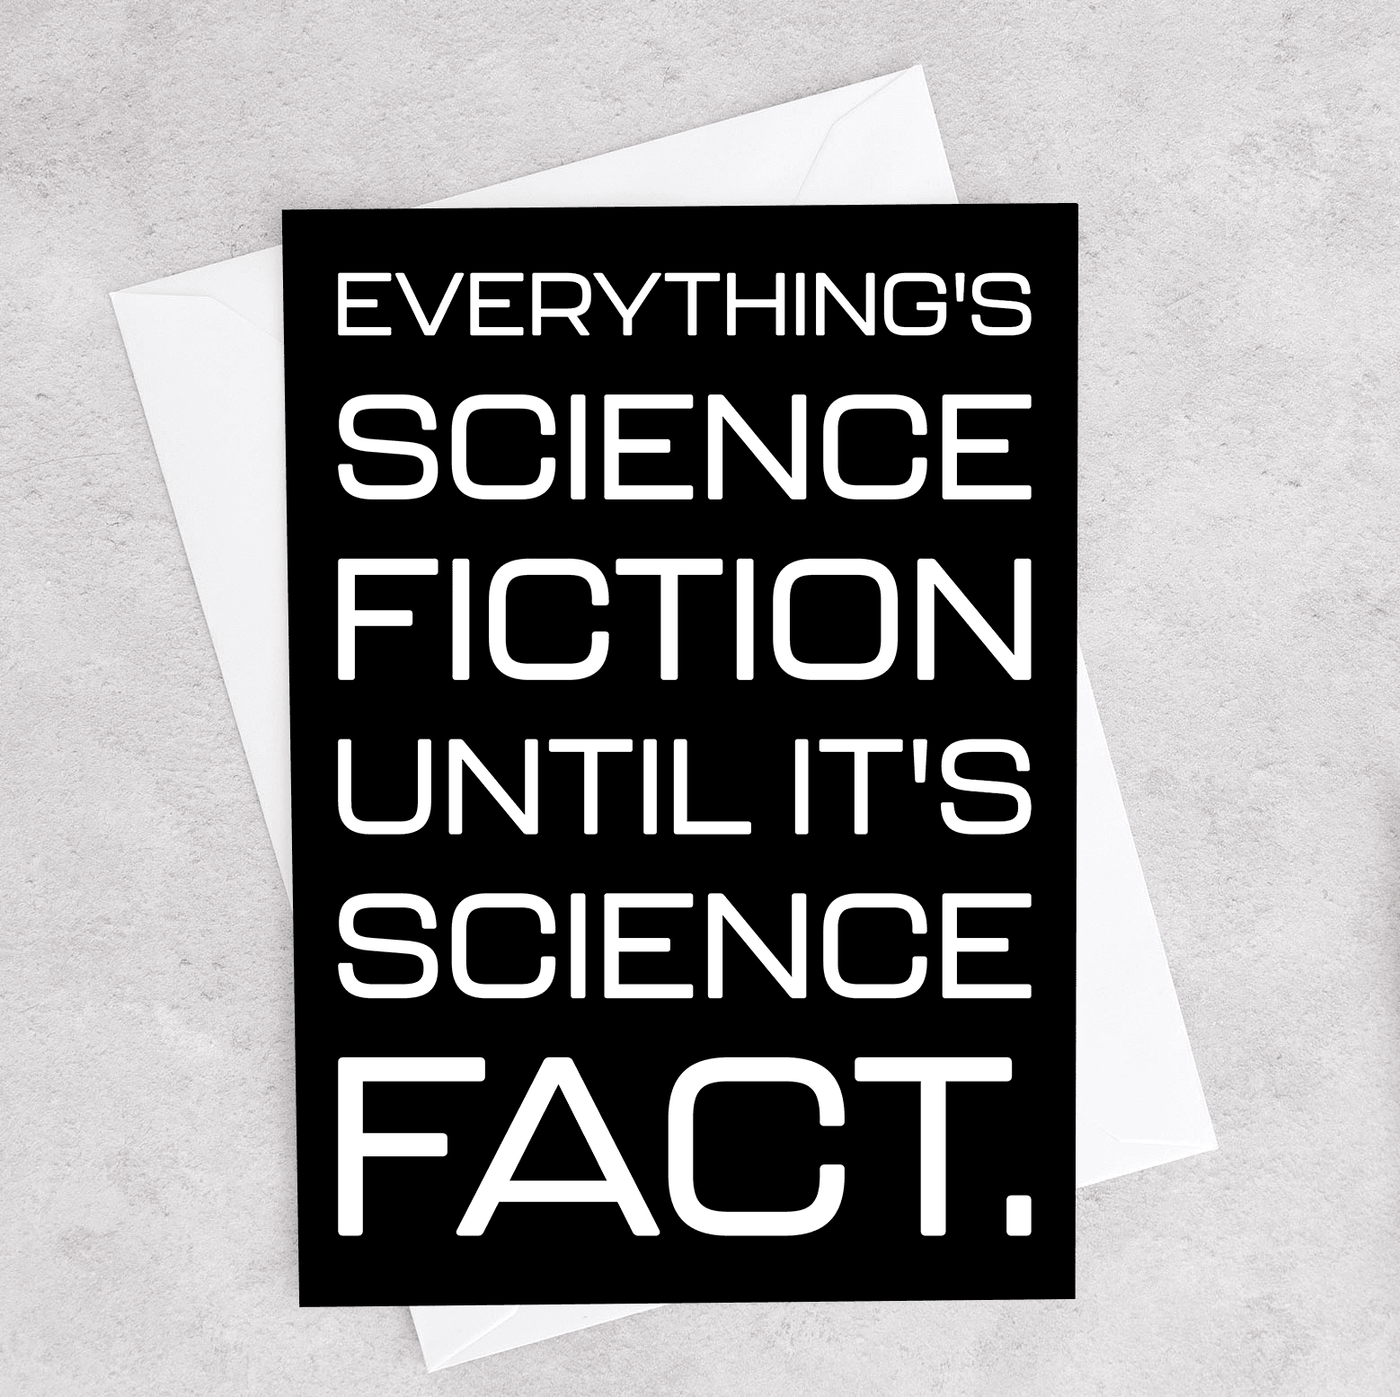 This greeting card says, "everything's science fiction until it's science fact."